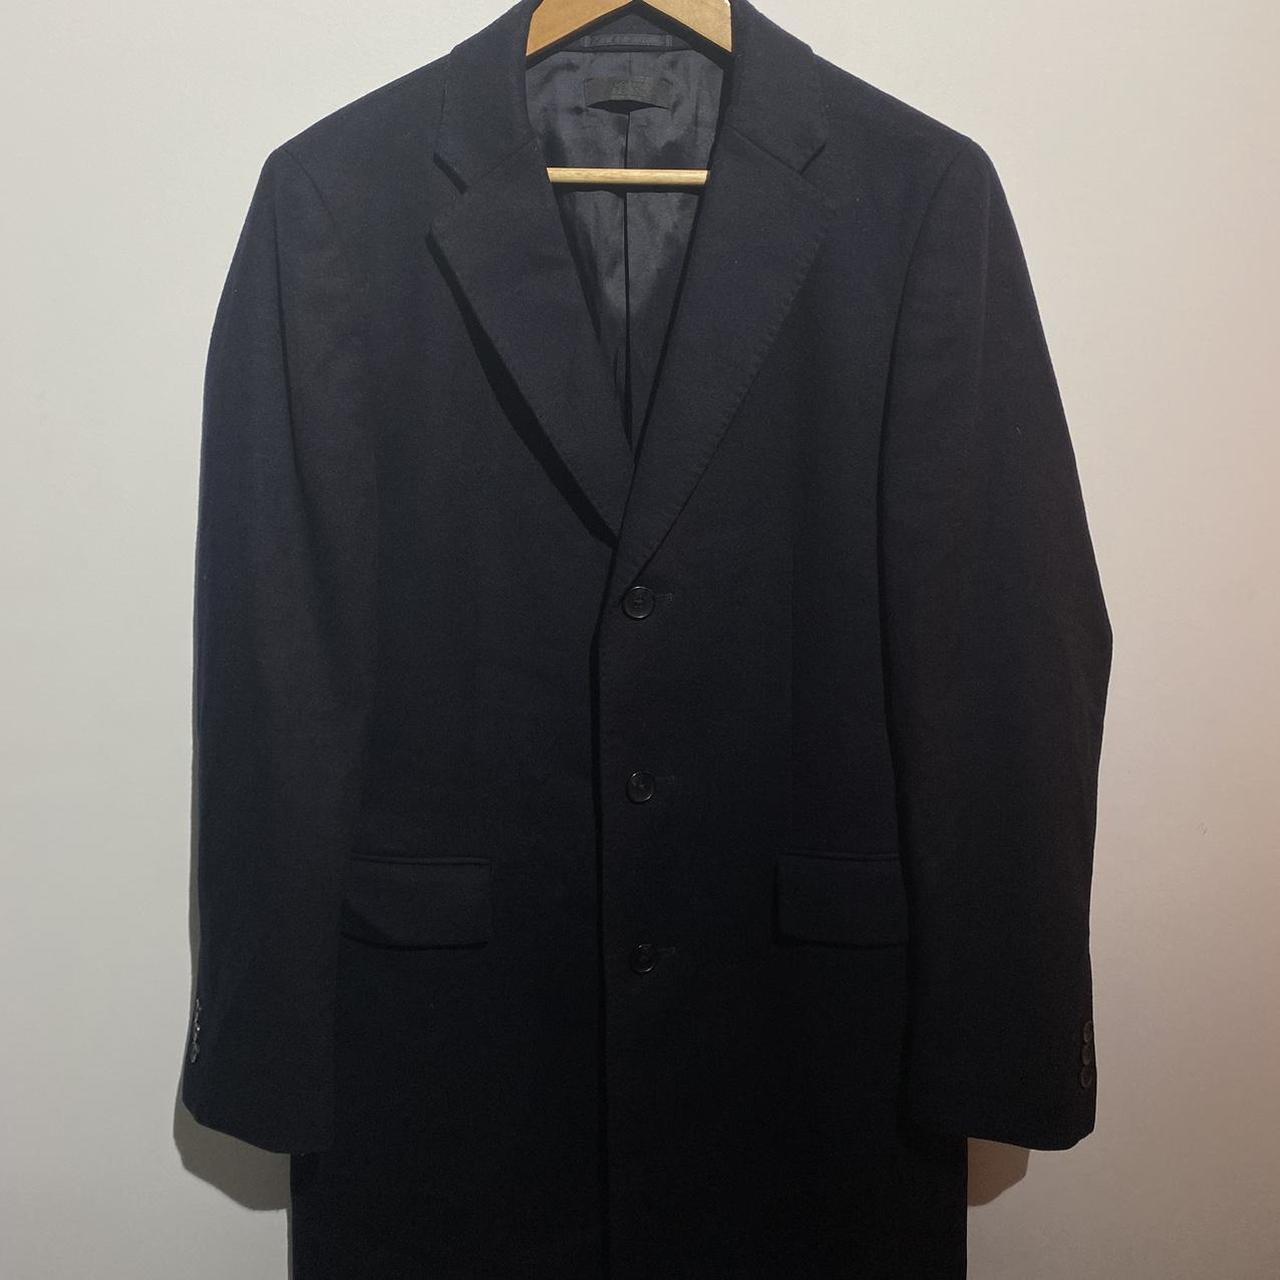 Uniqlo Navy cashmere/wool blend trench-coat Open to... - Depop